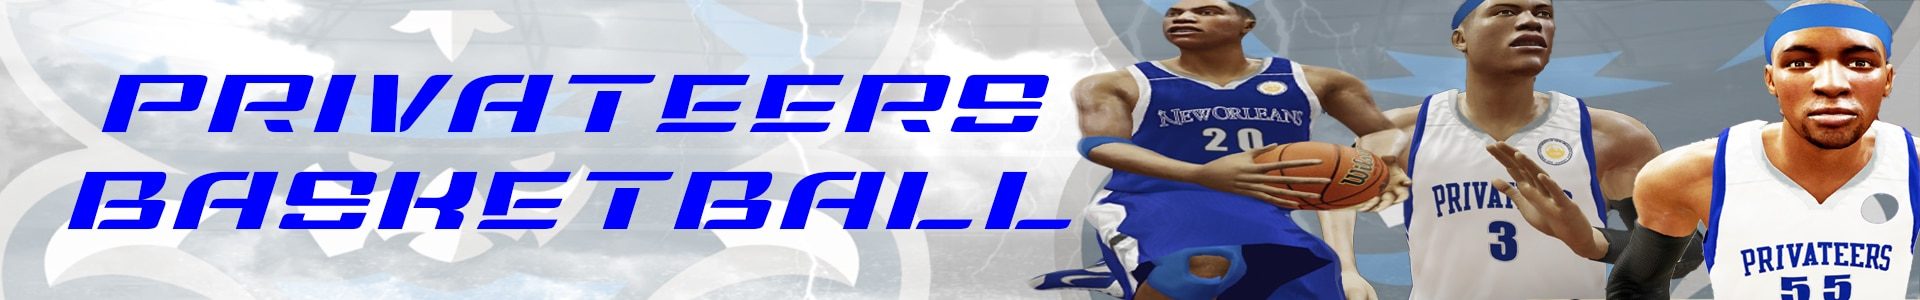 New Orleans Privateers Basketball Header